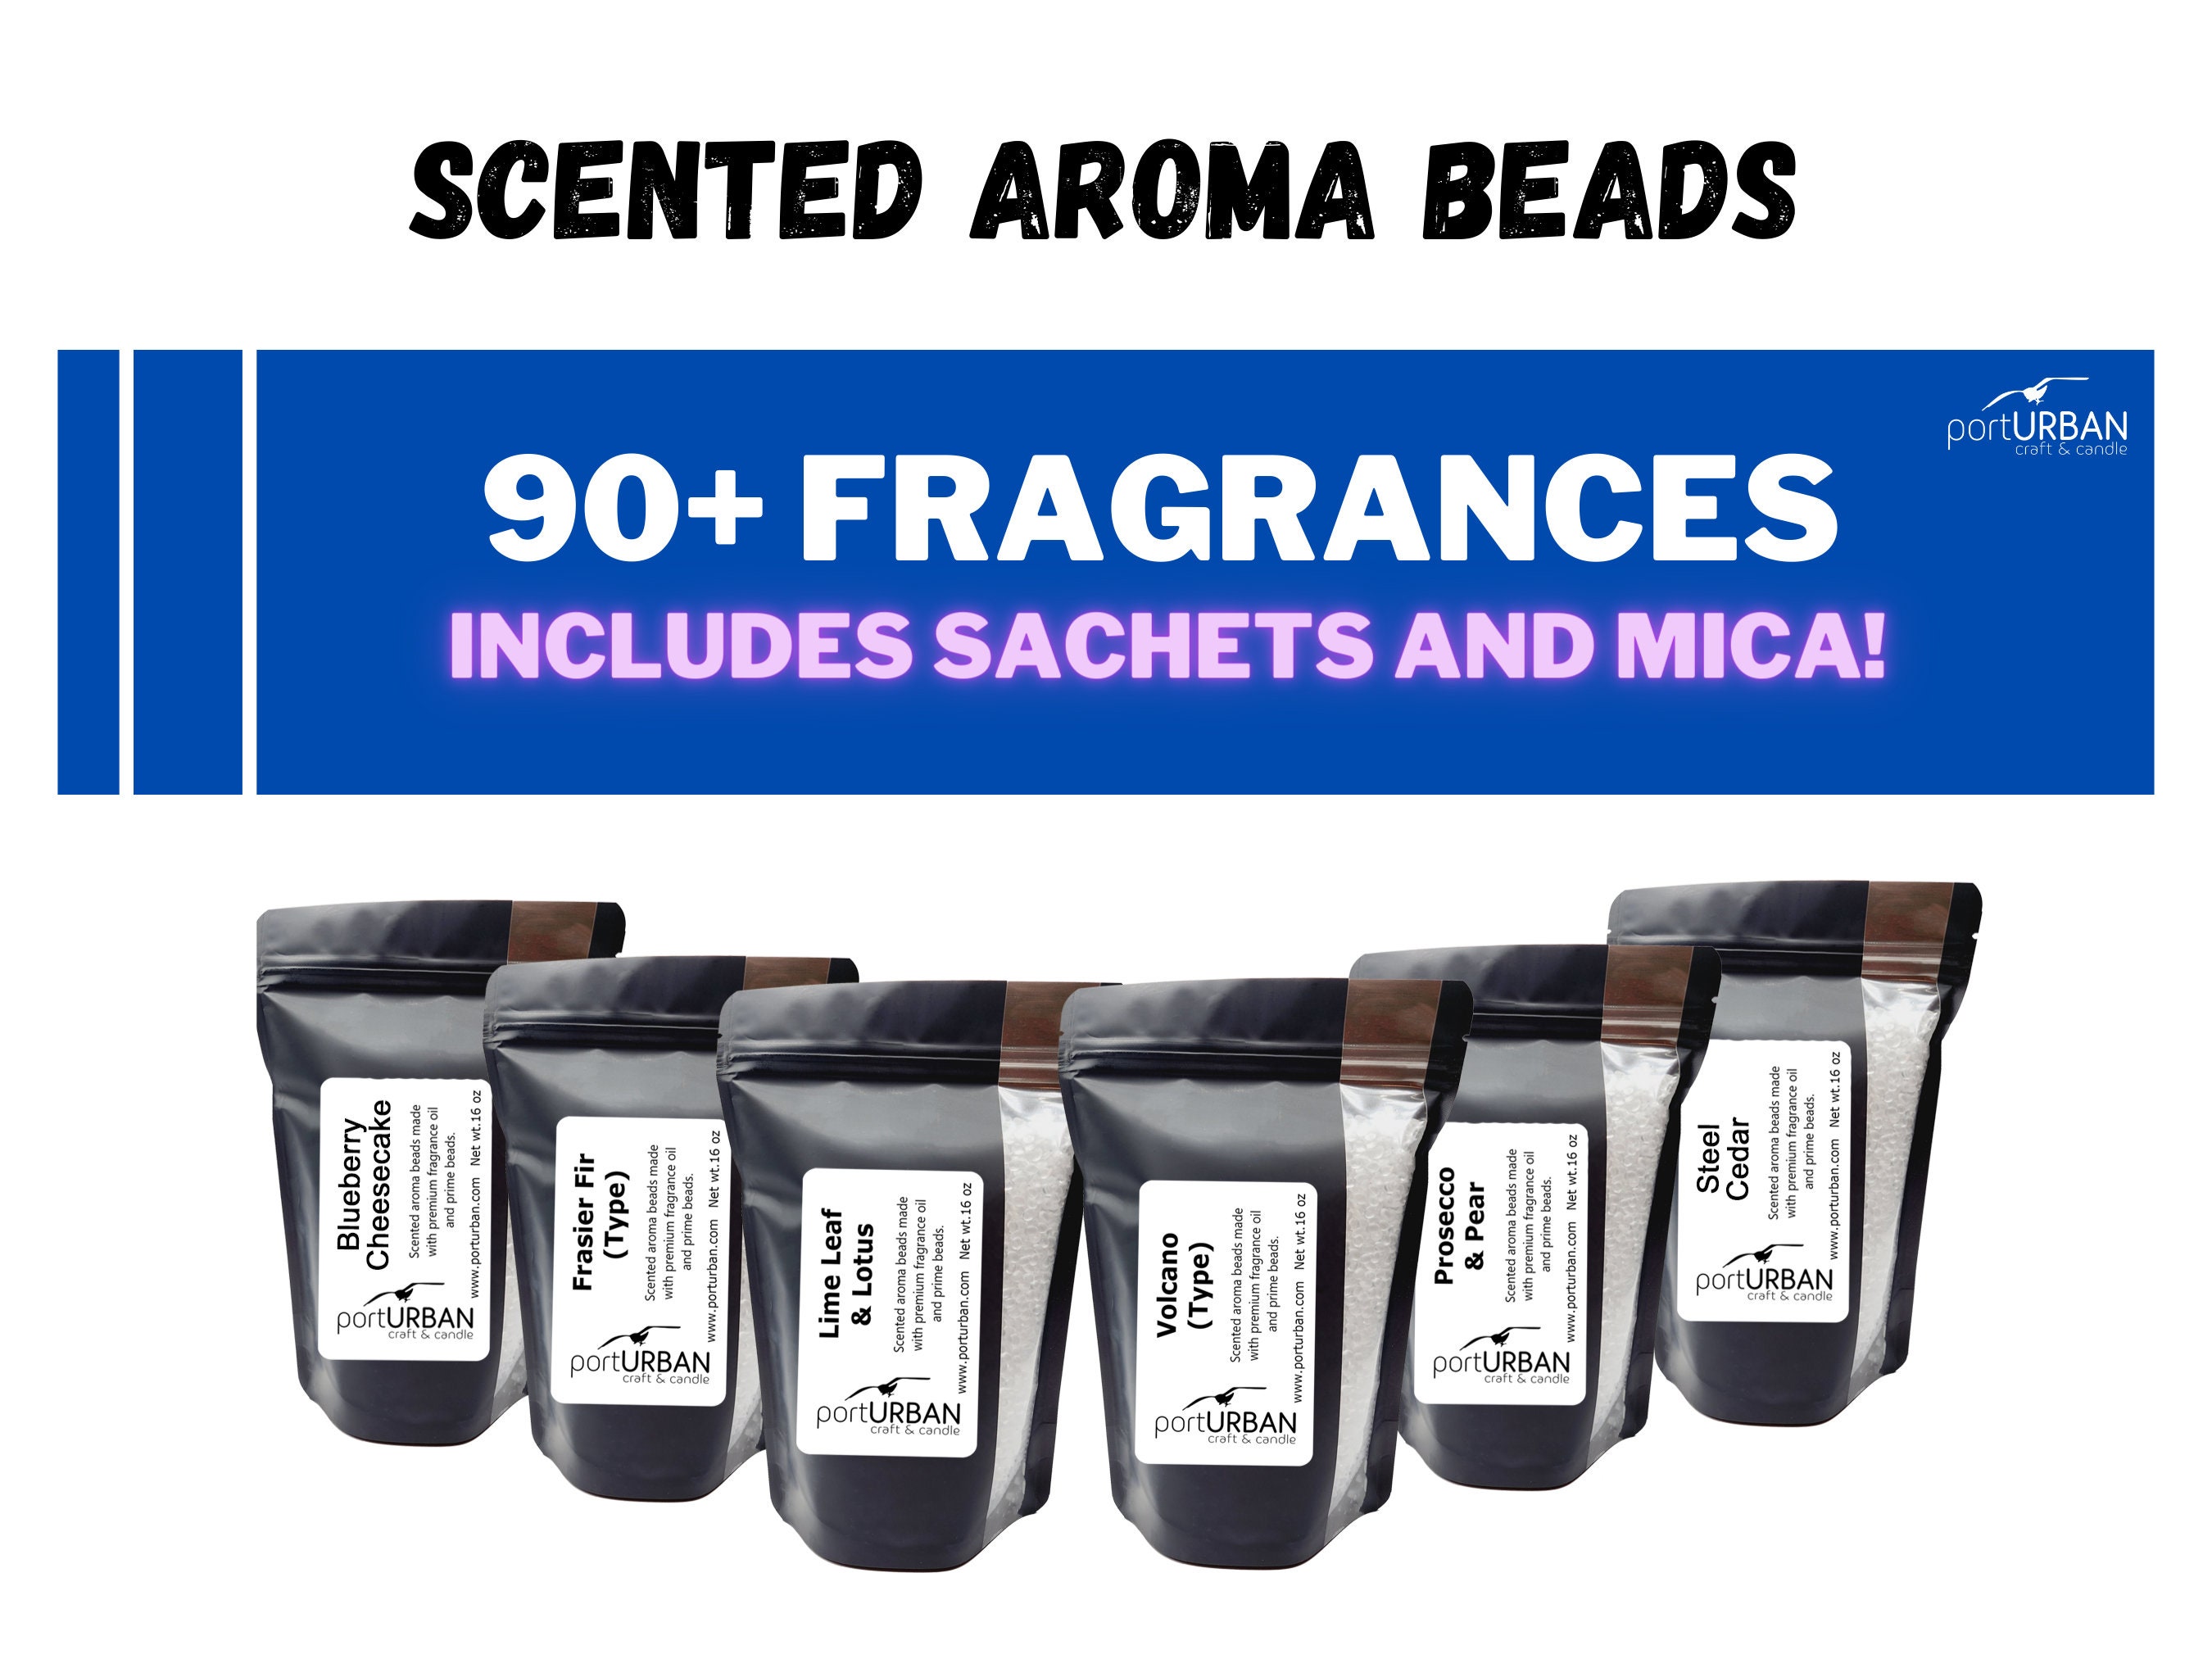 Aroma Beads for only $5.50 at Aztec Candle & Soap Making Supplies